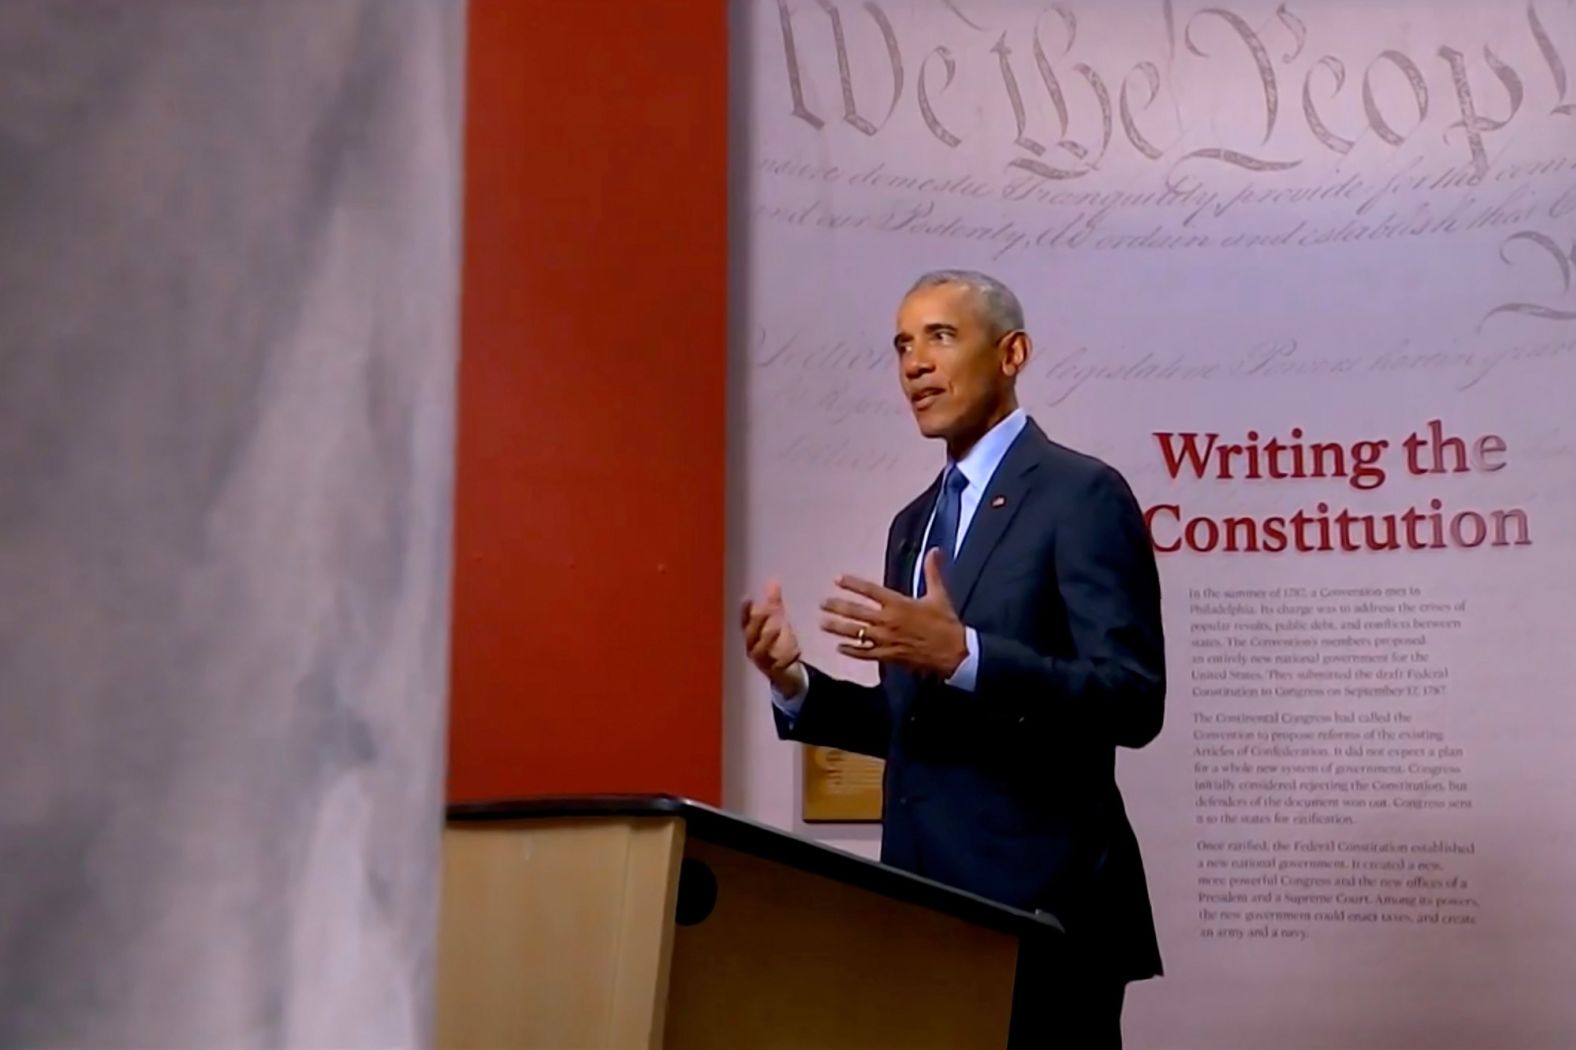 Former President Barack Obama gave a speech from Philadelphia, the birthplace of the Constitution, on Wednesday. During his speech, <a href="index.php?page=&url=https%3A%2F%2Fwww.cnn.com%2Fpolitics%2Flive-news%2Fdnc-2020-day-3%2Fh_2b495ea2c84473ce4ce16a1d8122e516" target="_blank">he excoriated President Trump</a> as incapable of handling the responsibilities of the office. "I did hope, for the sake of our country, that Donald Trump might show some interest in taking the job seriously; that he might come to feel the weight of the office and discover some reverence for the democracy that had been placed in his care," Obama said. "But he never did."